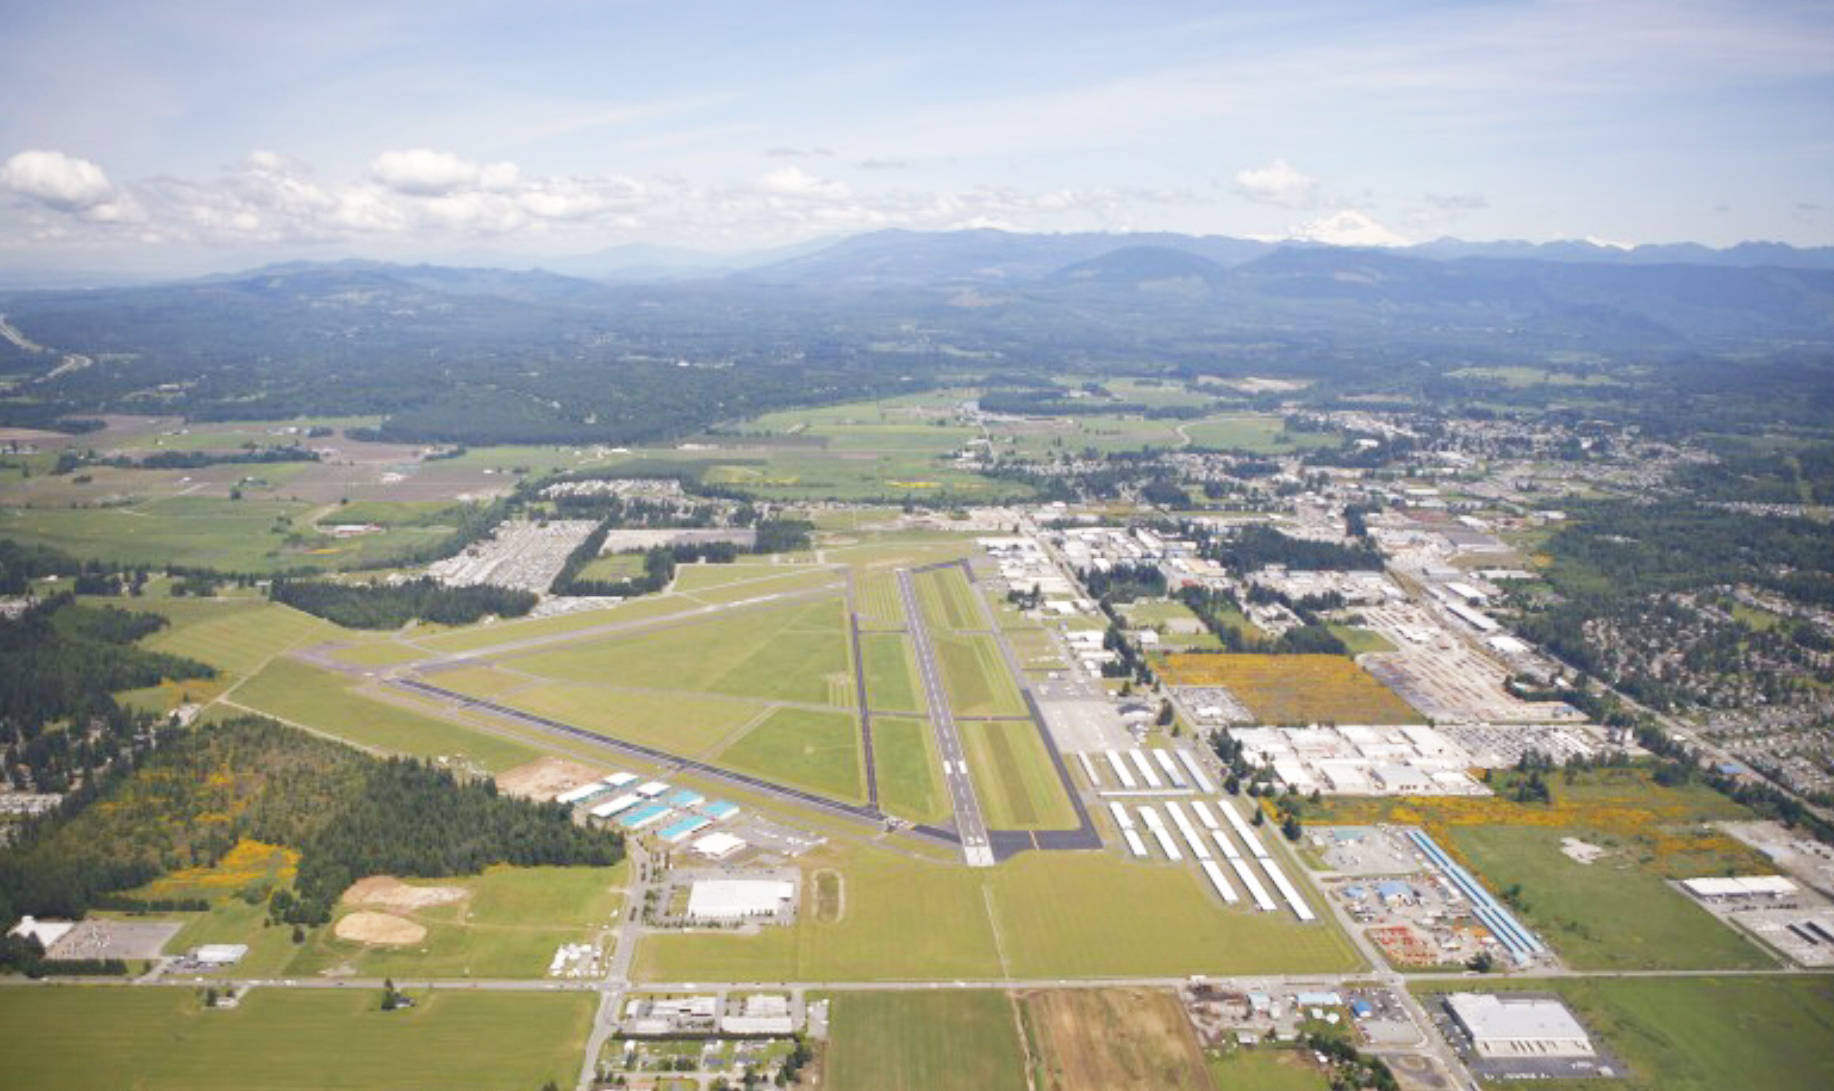 Friendly skies: How does passenger air service at Paine Field impact Arlington Airport?